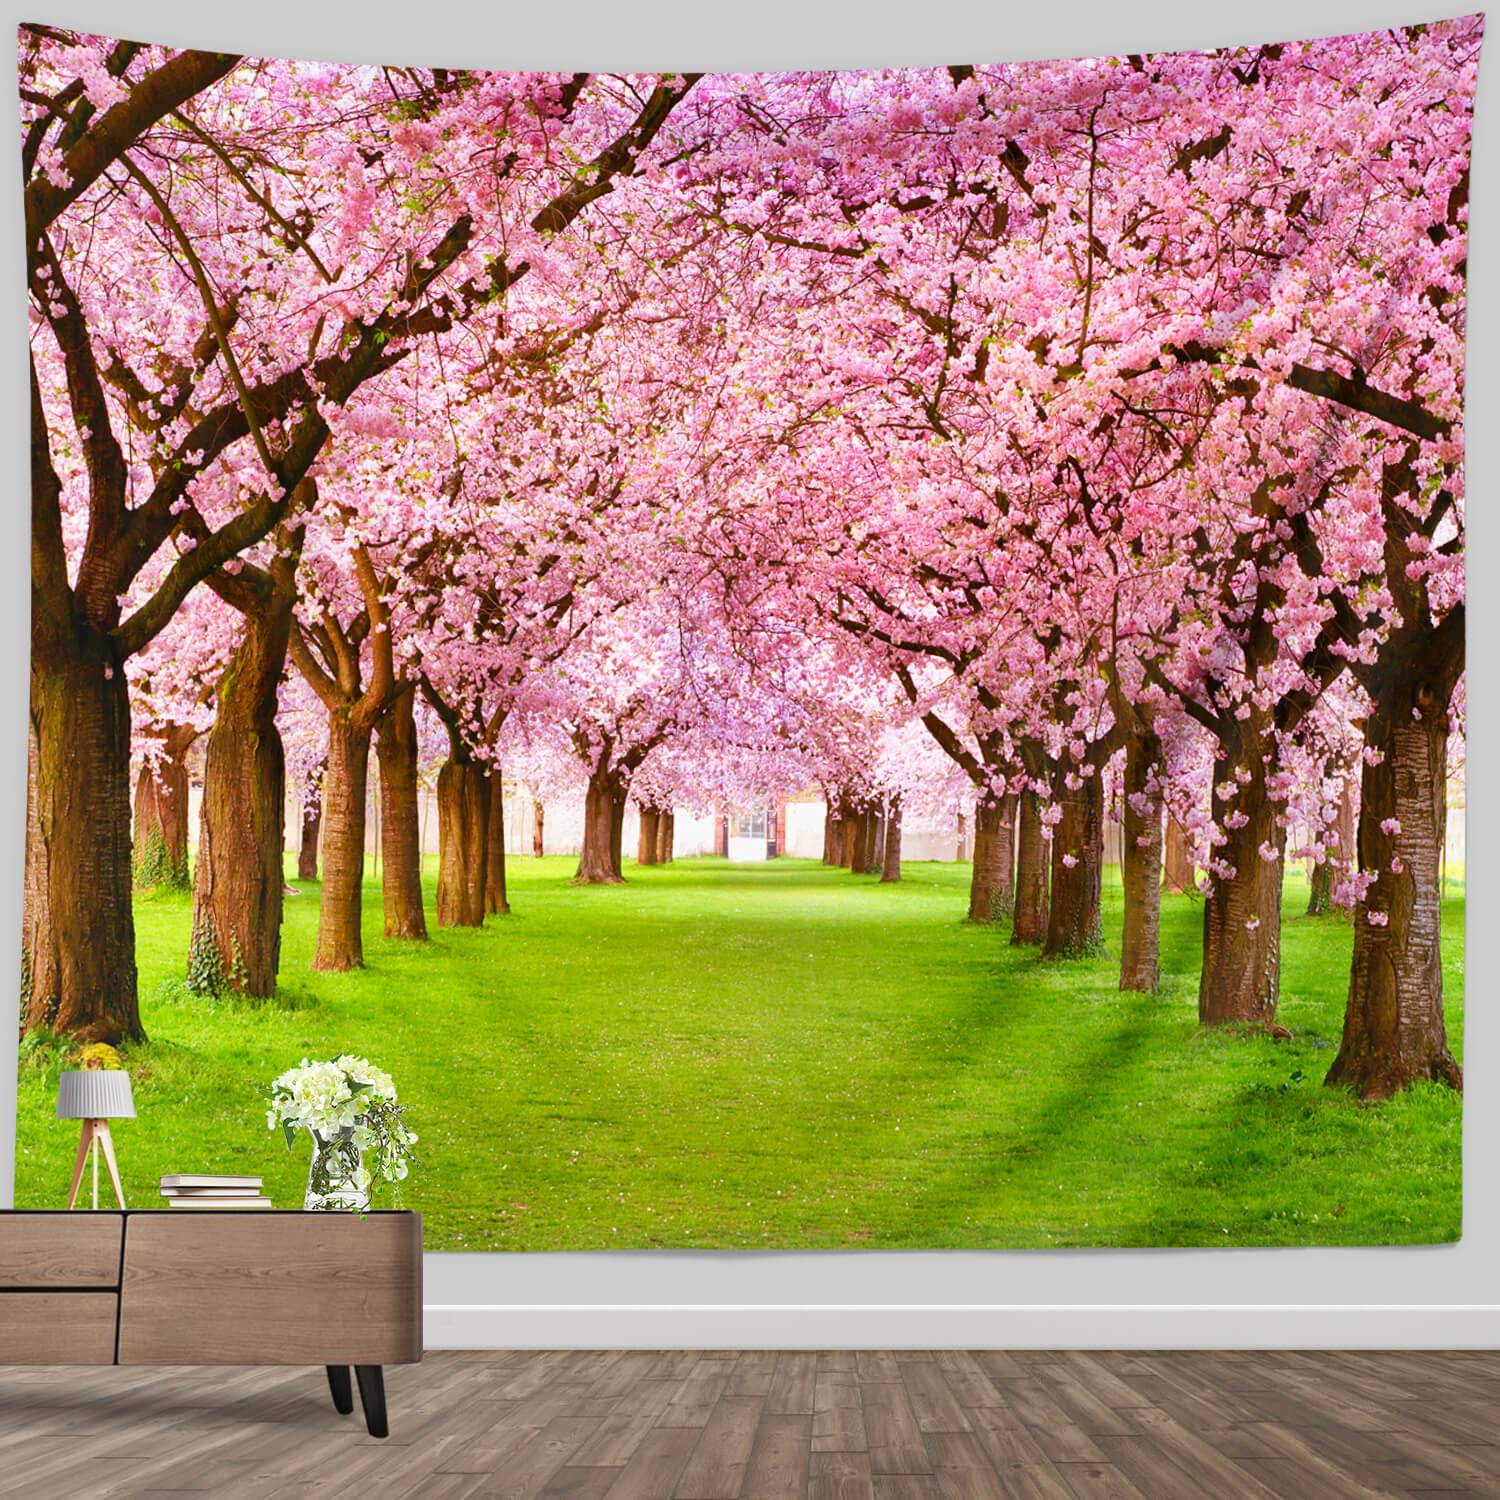 BROSHAN Pink Flower Tapestry Wall Hanging, Nature Floral Bedroom Tapestry Small - Cute Cherry Flowers Trees Garden Scenic Tapestries for Living Room Home Office Dorm Fabric Wall Art Blanket